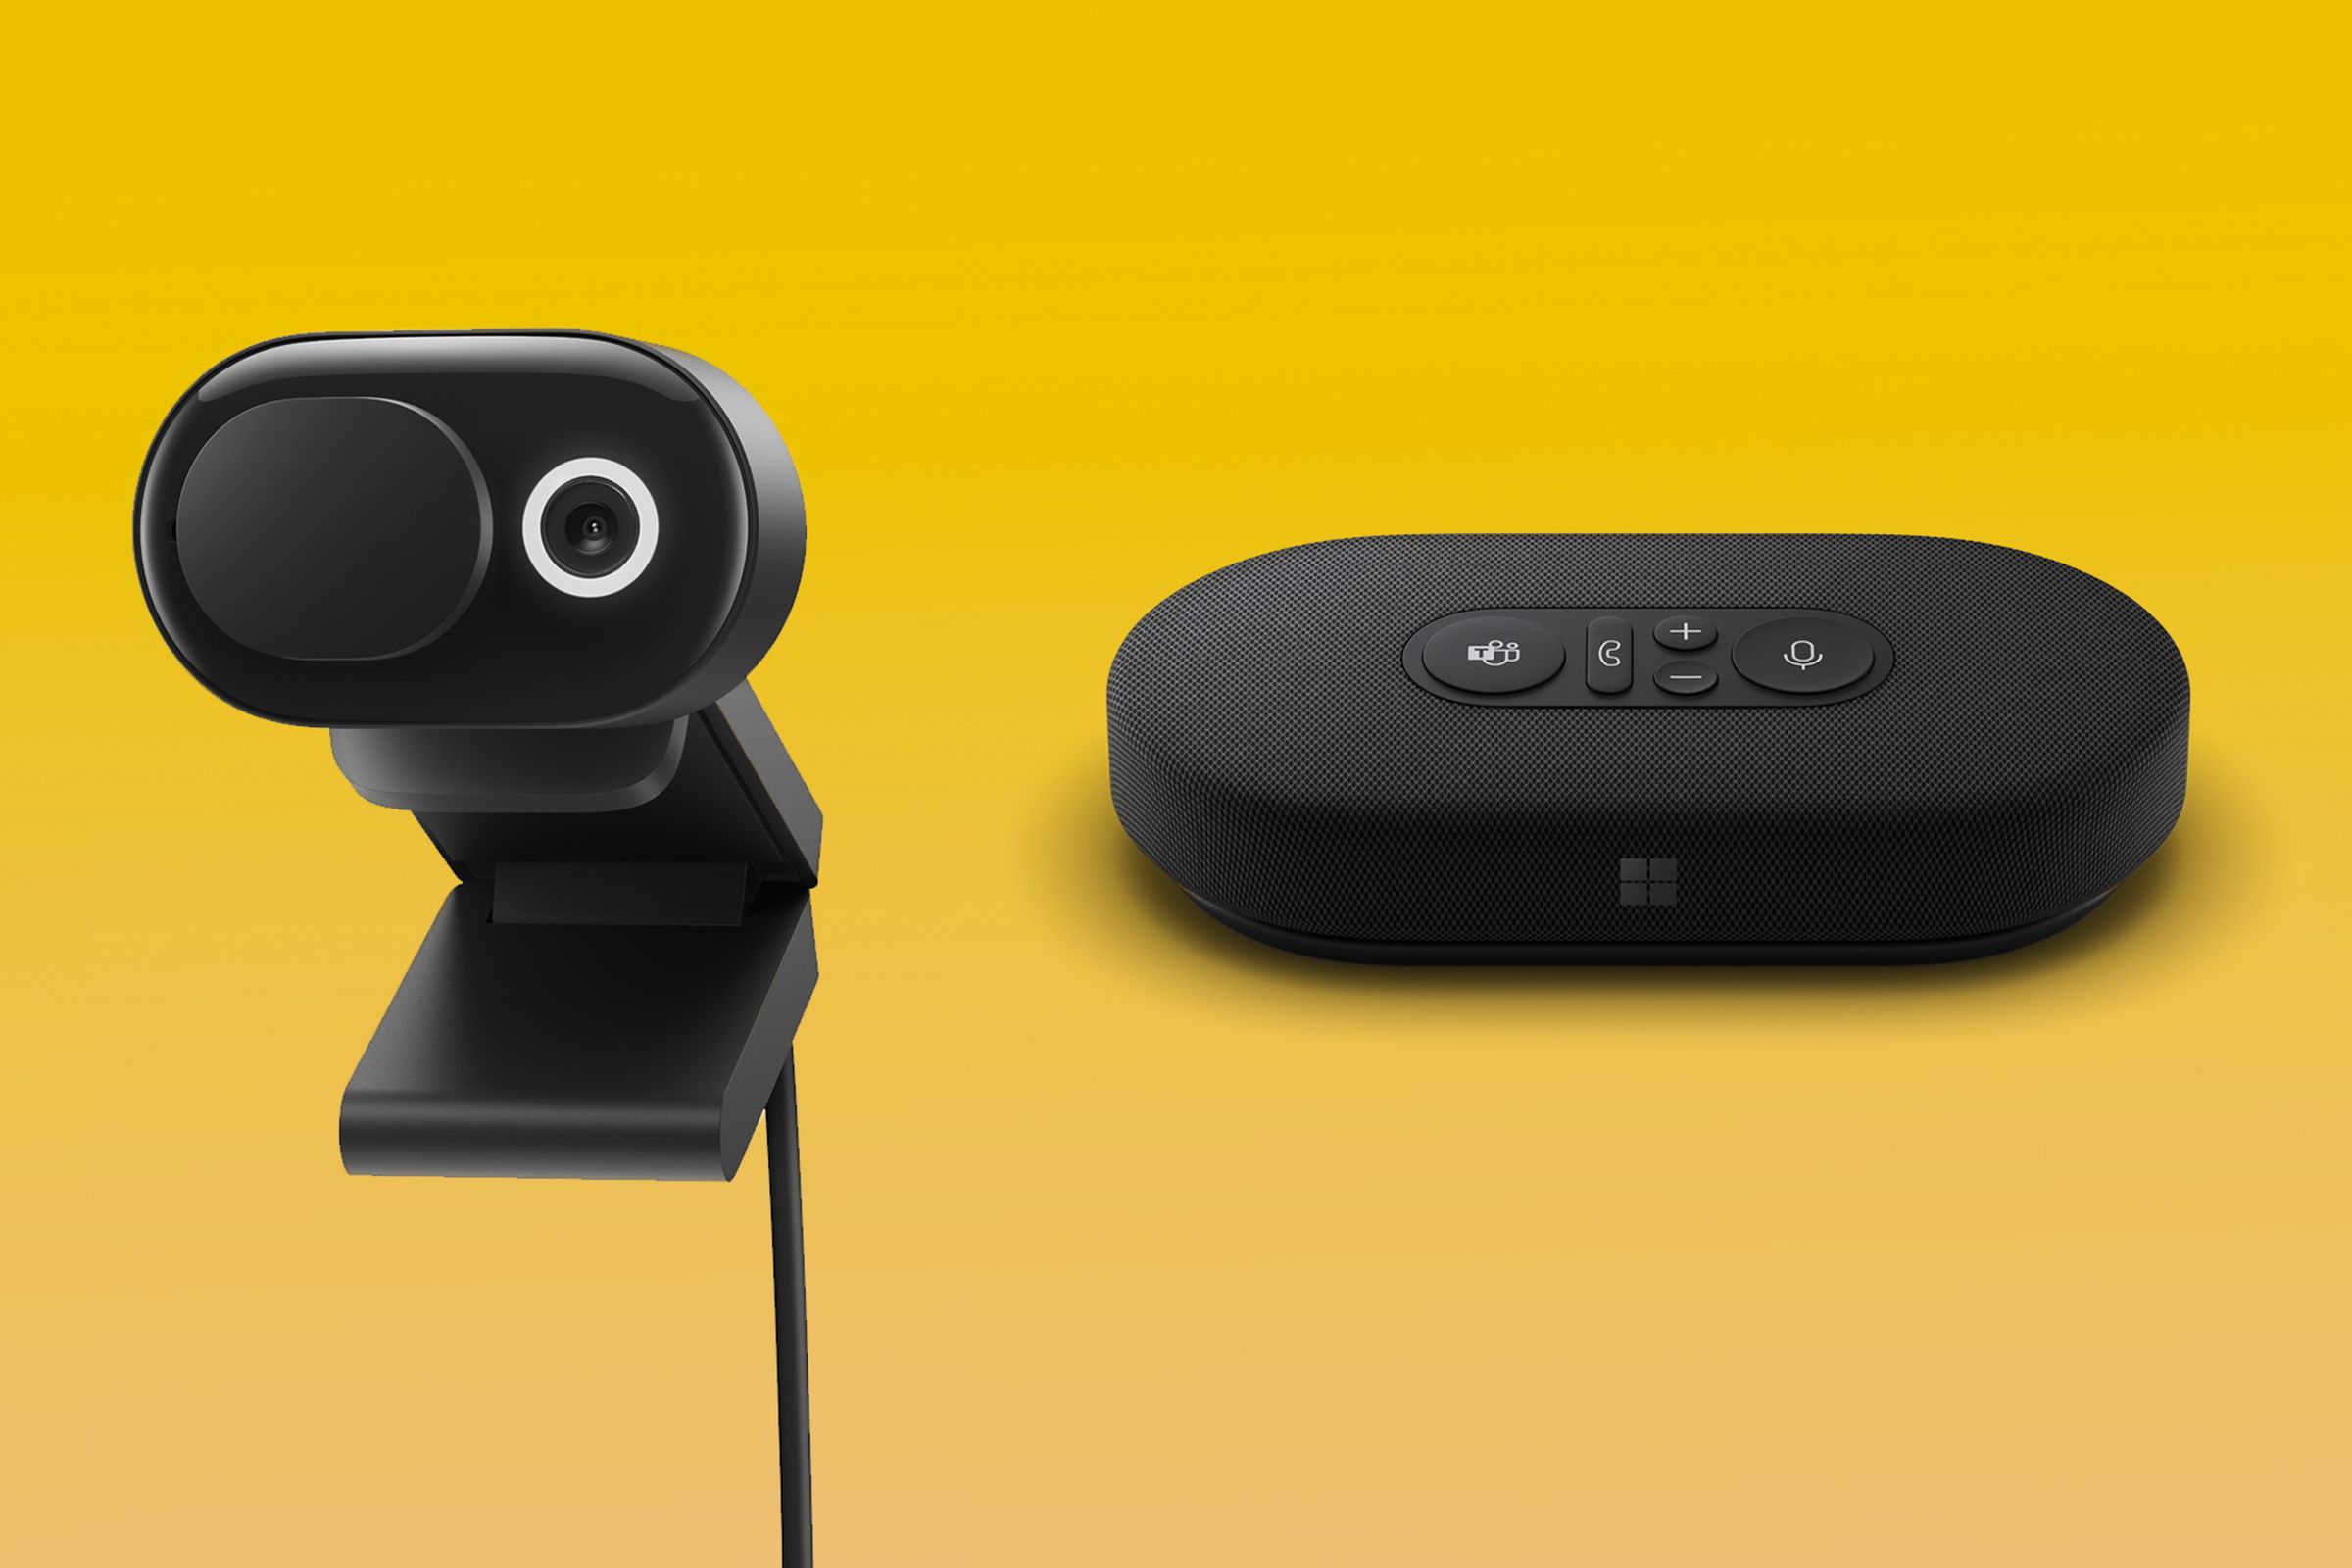 Microsoft’s webcams are being discontinued.